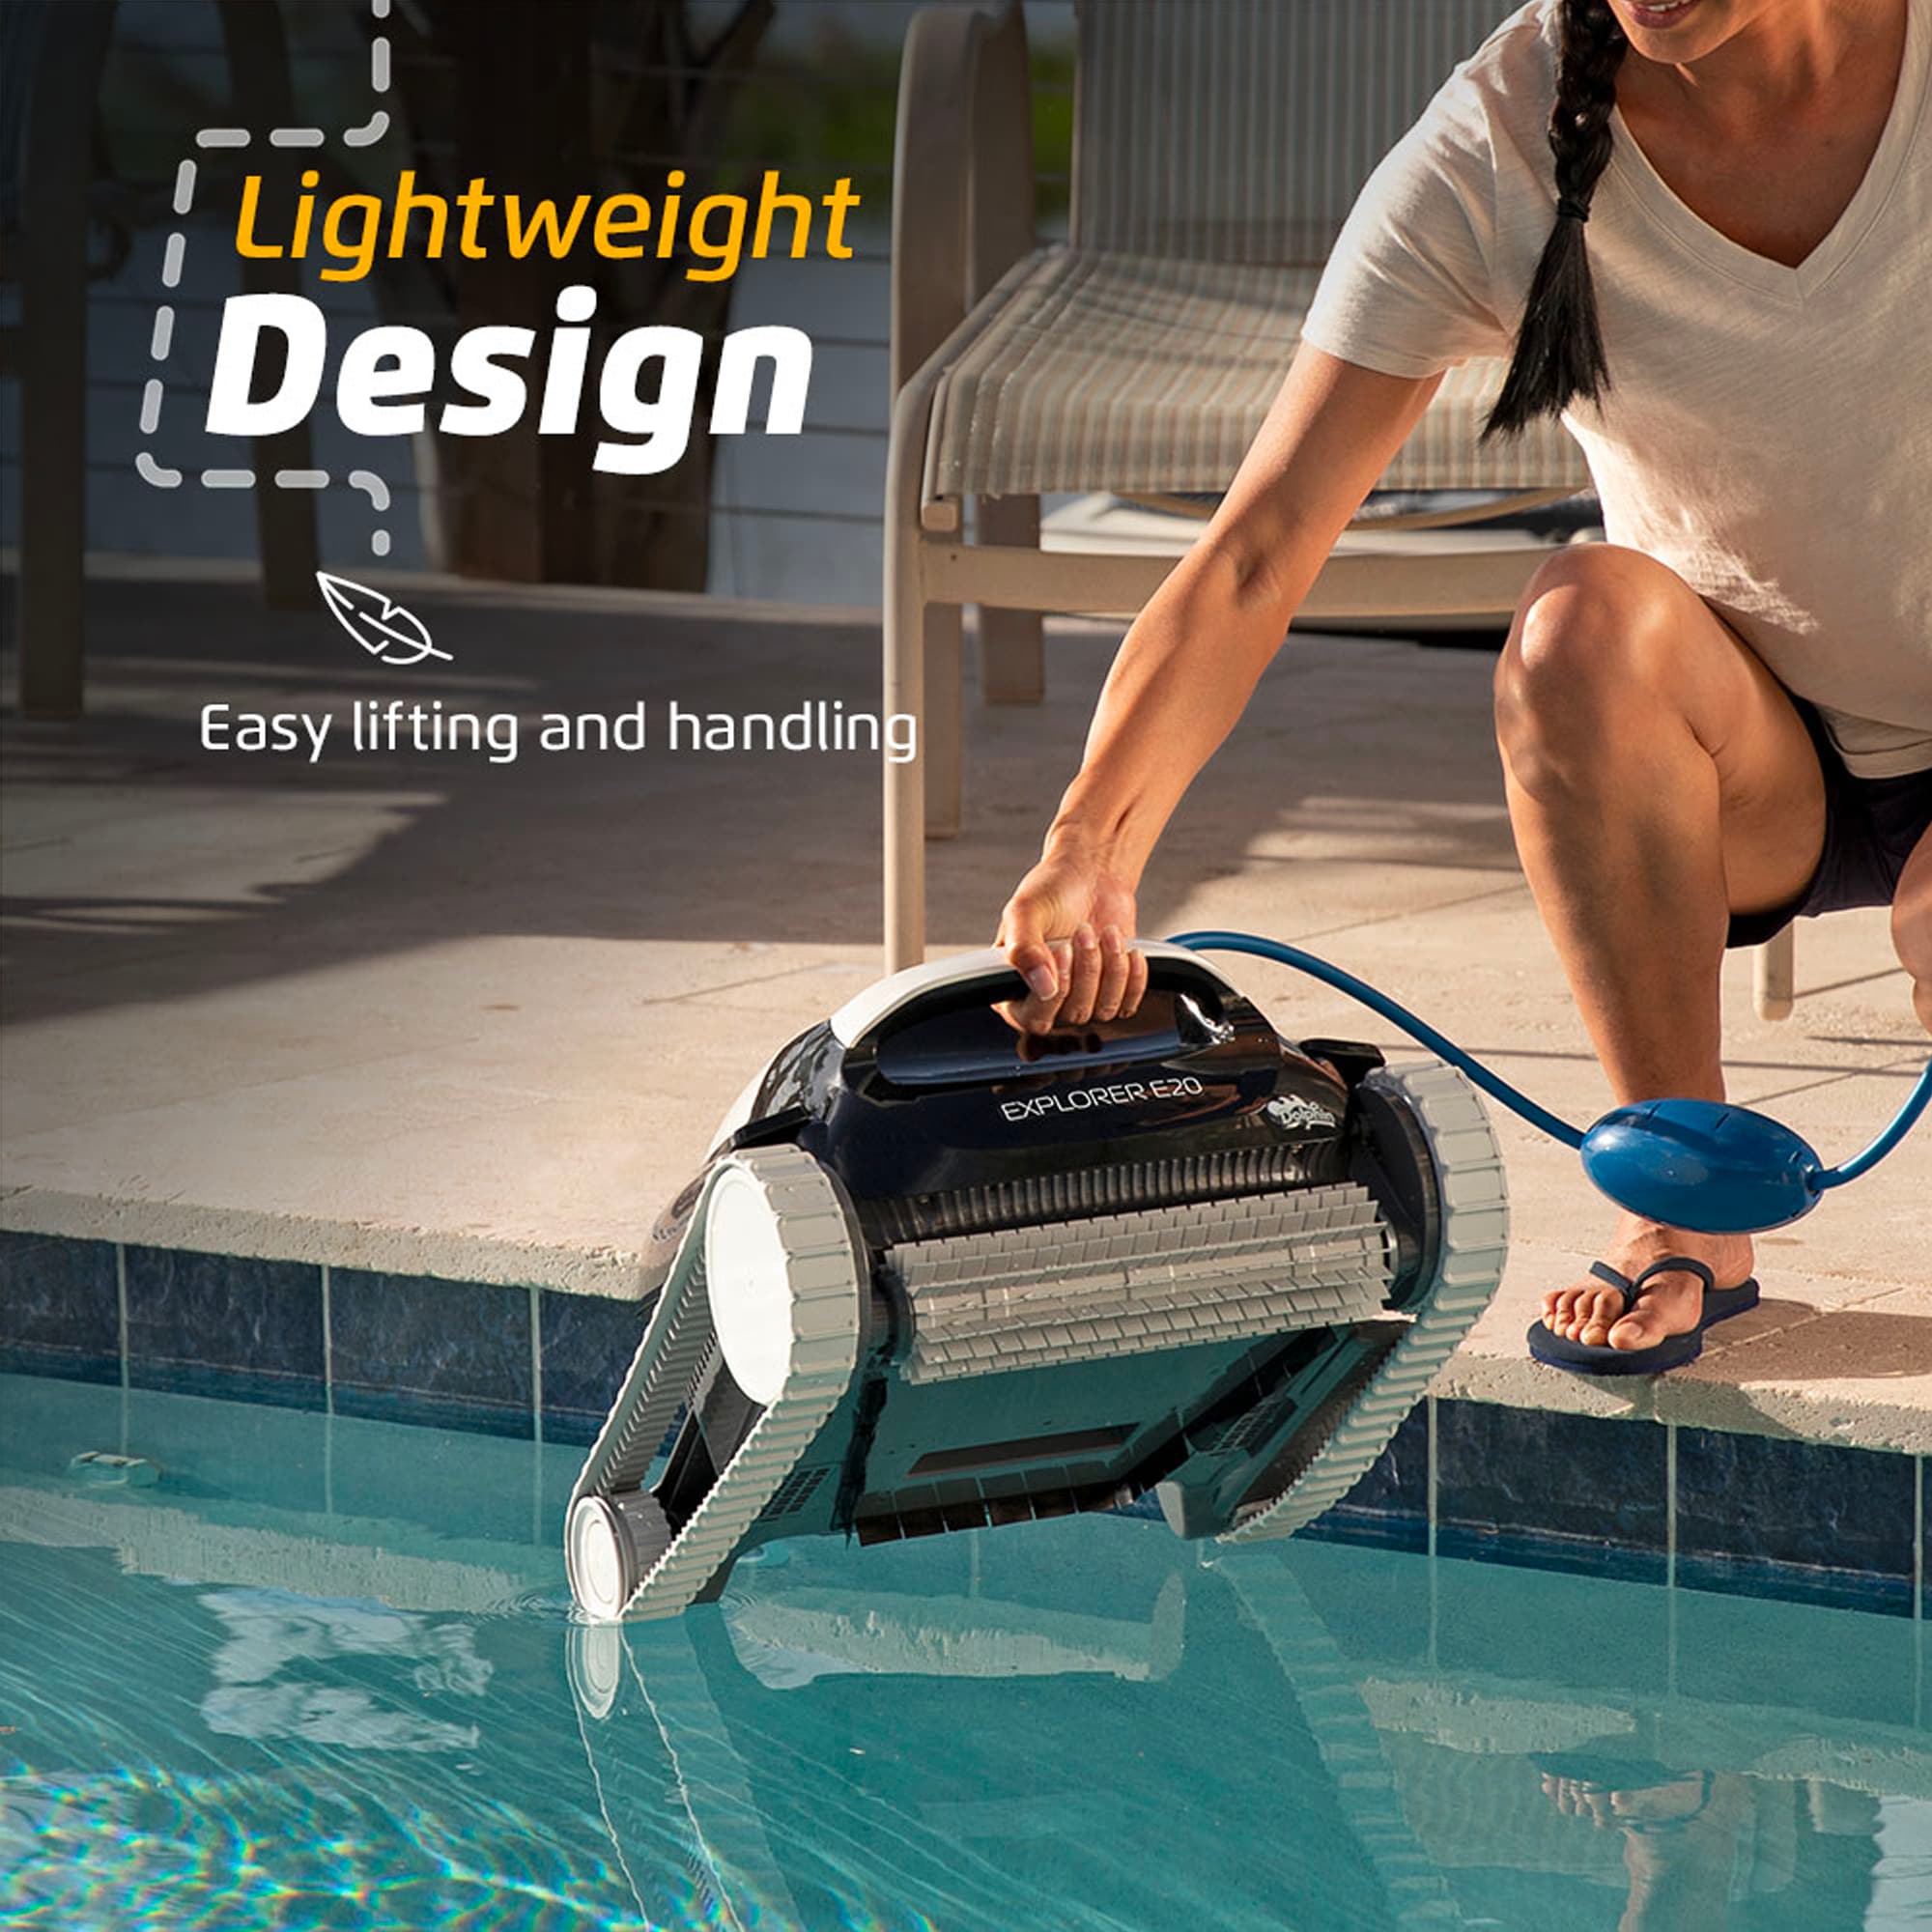 Dolphin Explorer E20 Robotic Pool Cleaner with Universal Caddy and